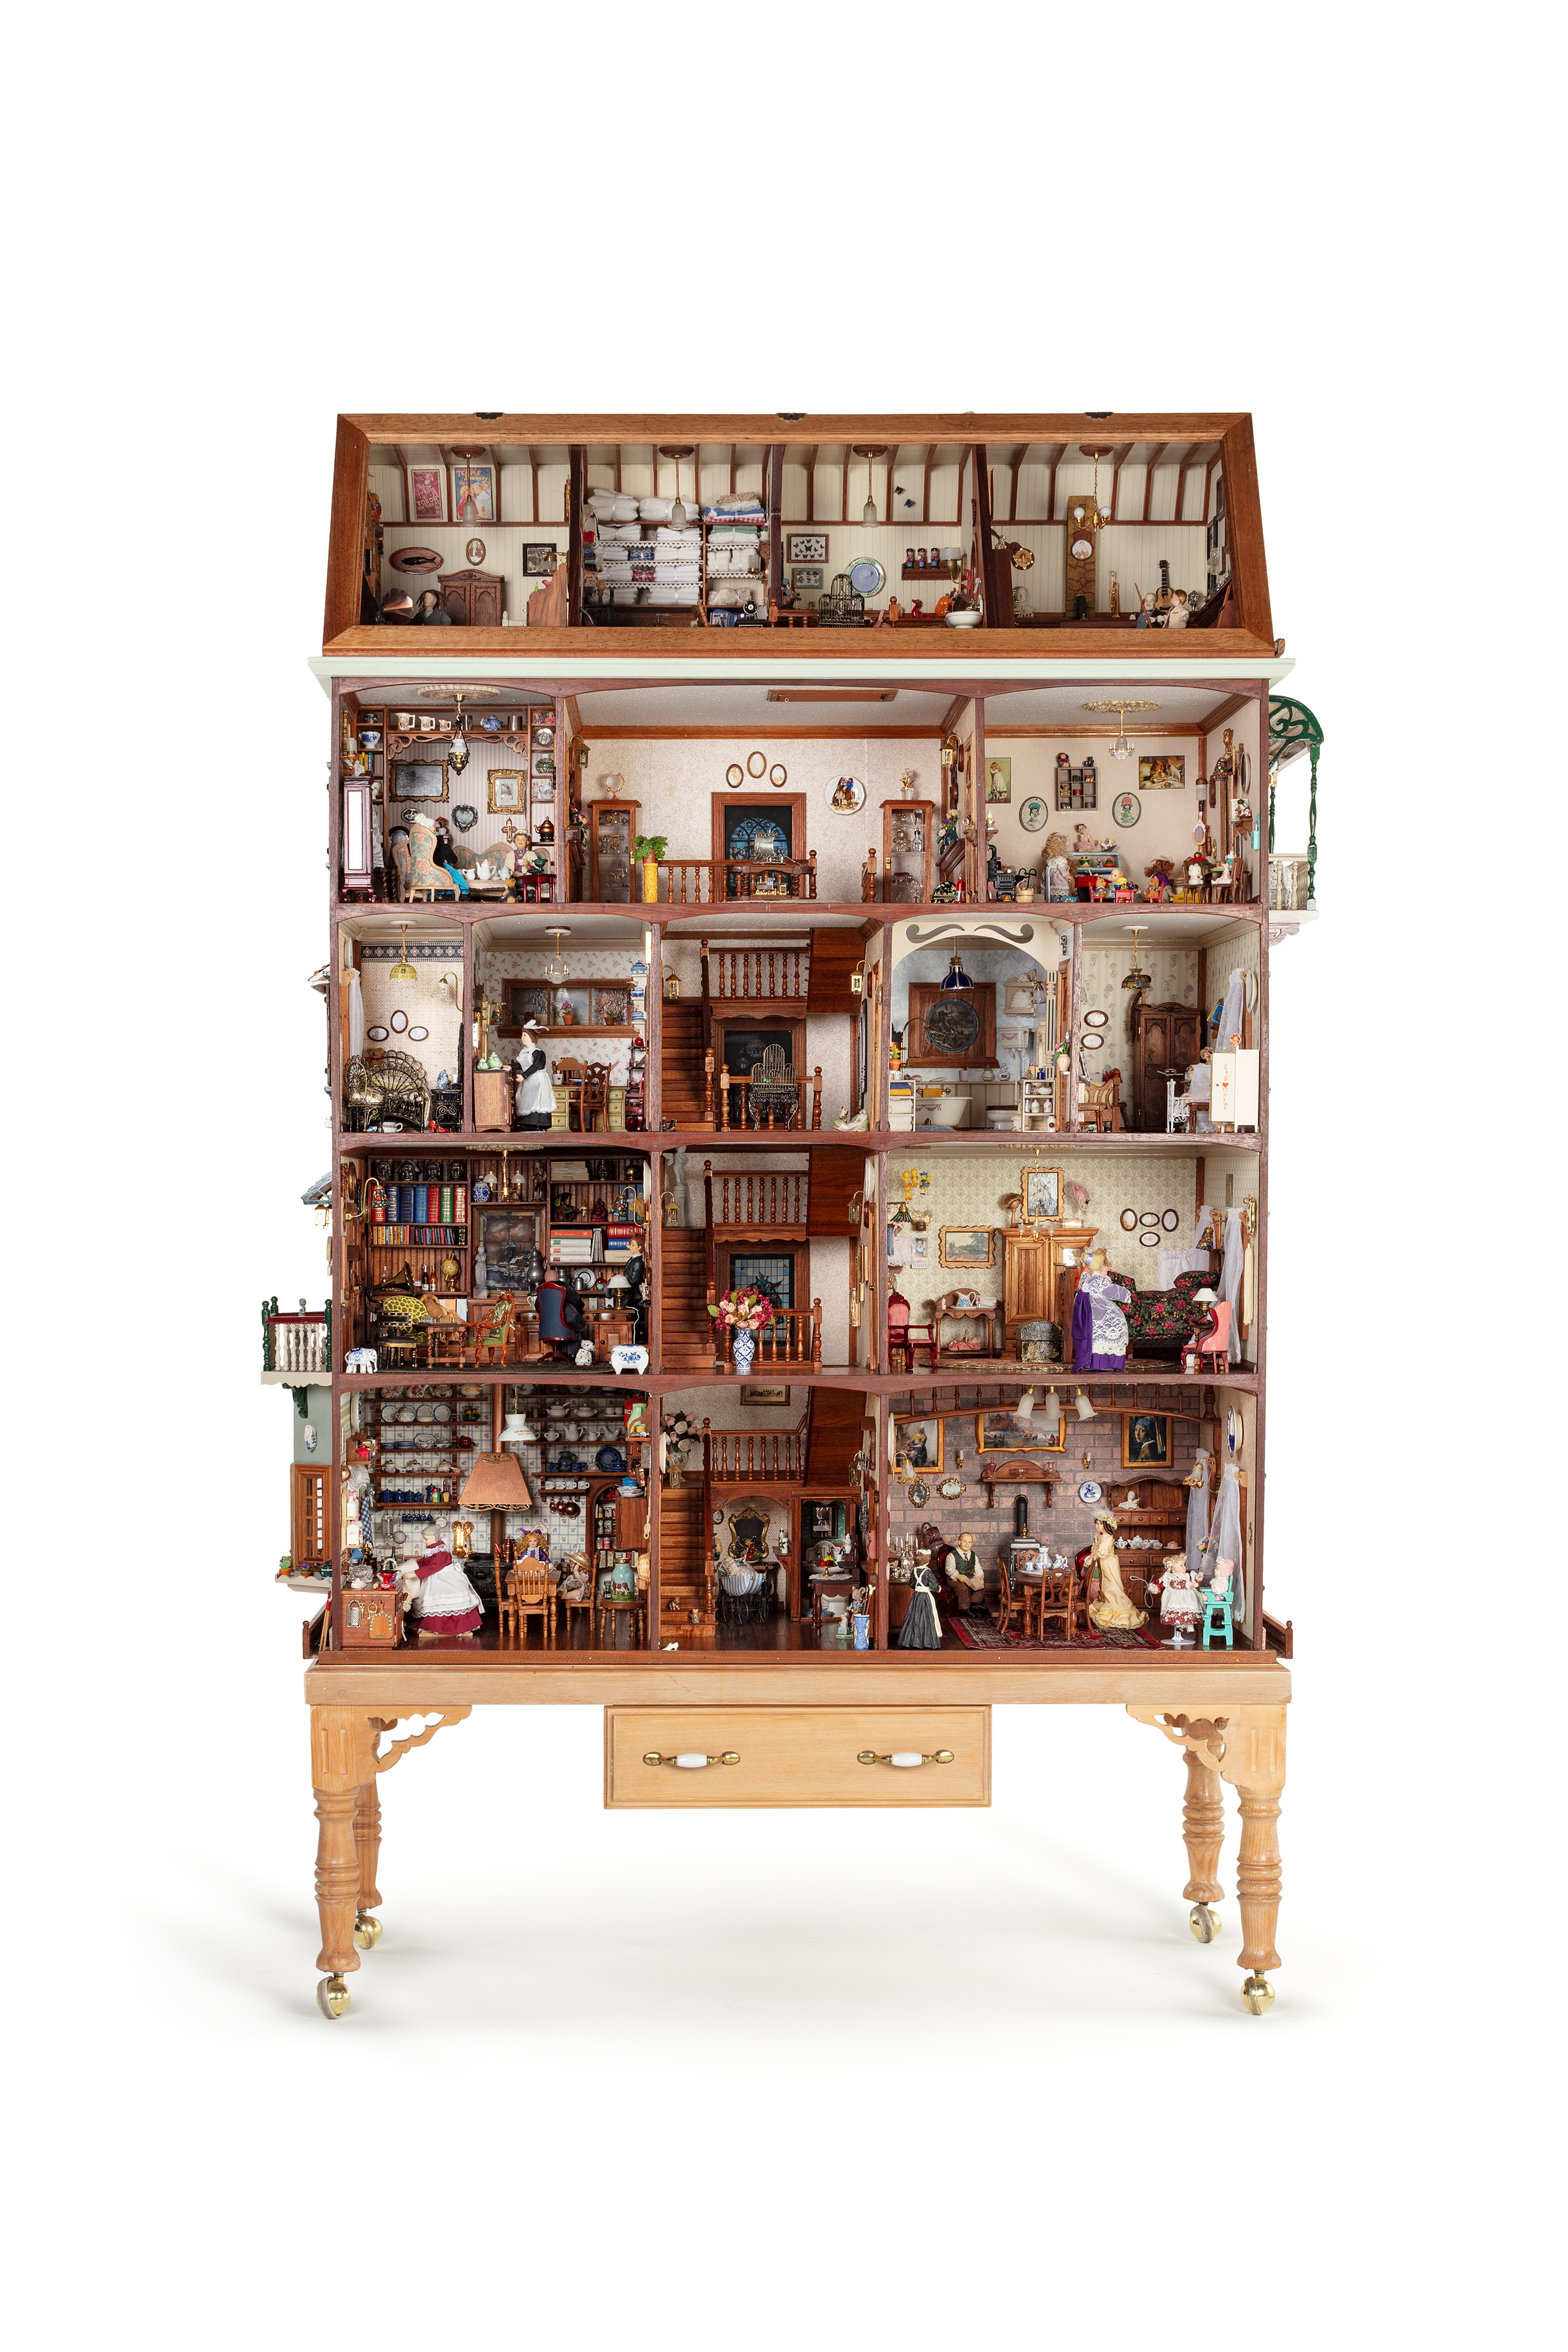 Doll's house made by Frans and Christina Bosdyk